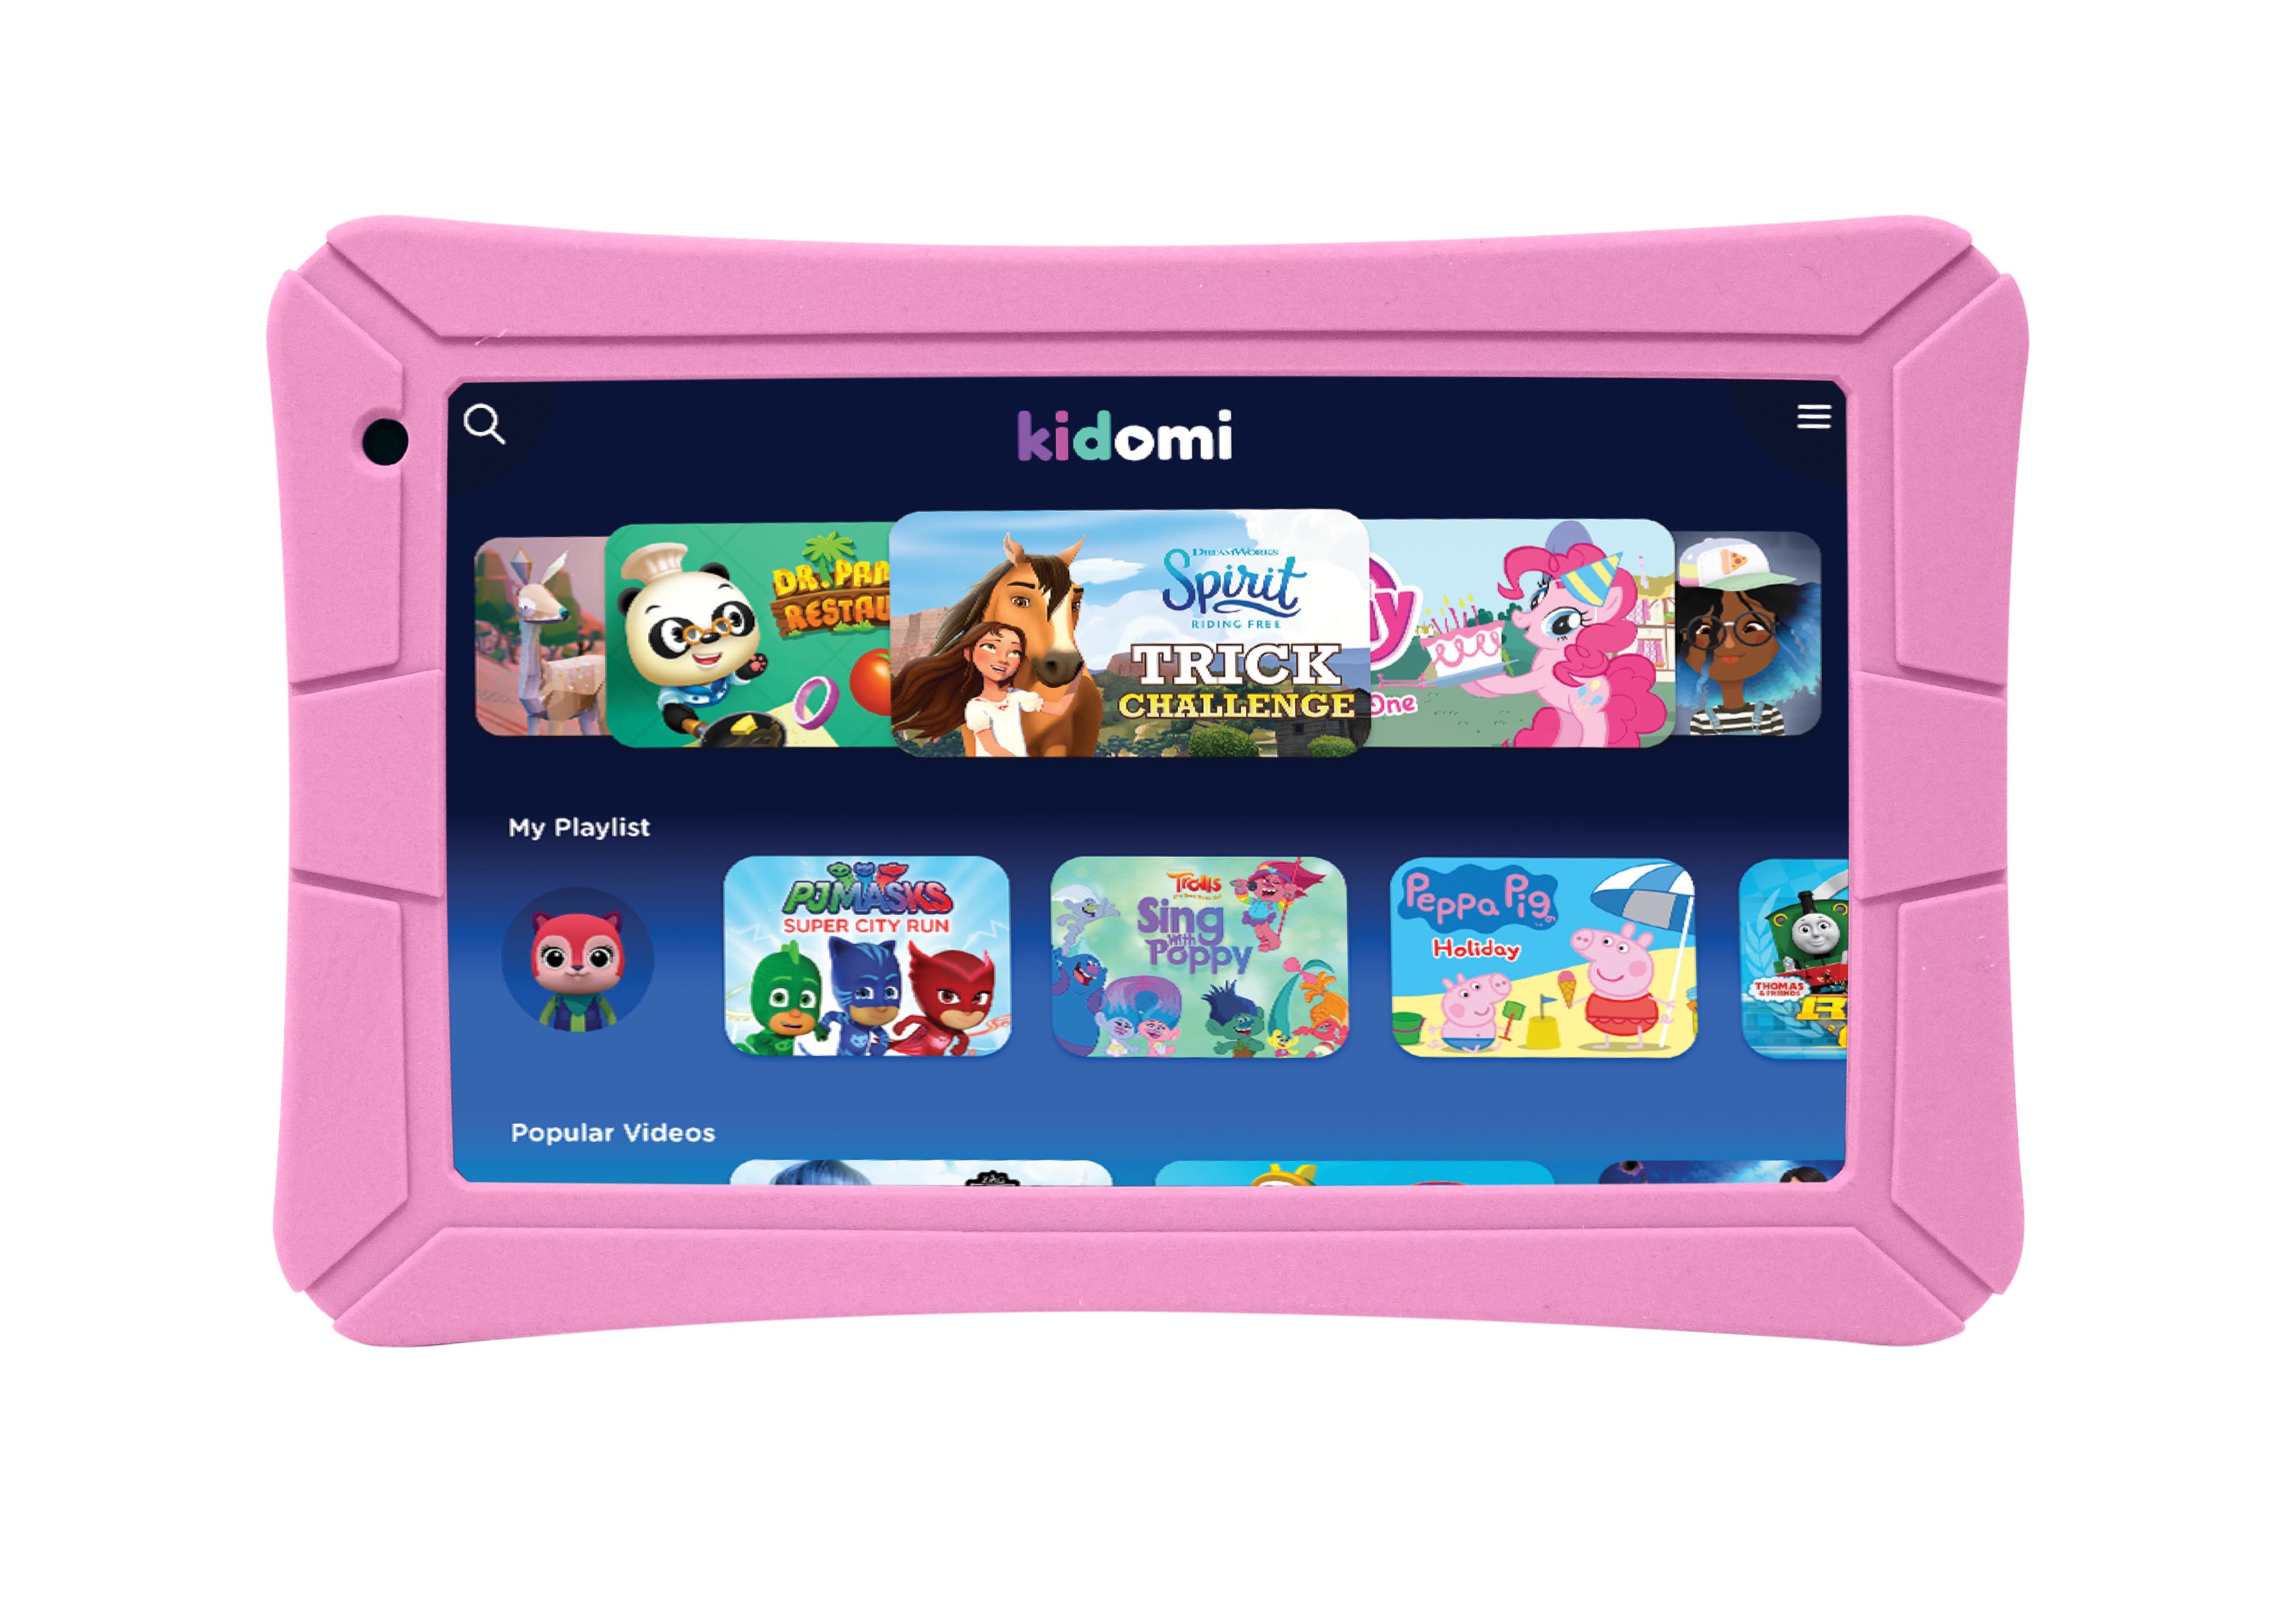 HighQ 7" Learning Tab Jr. featuring Kidomi, Gel Case Included, Quad Core Processor, 8GB Storage, Android 8.1 Go Edition, Dual Cameras, Kidomi Free Trial Included, Pink - image 1 of 6